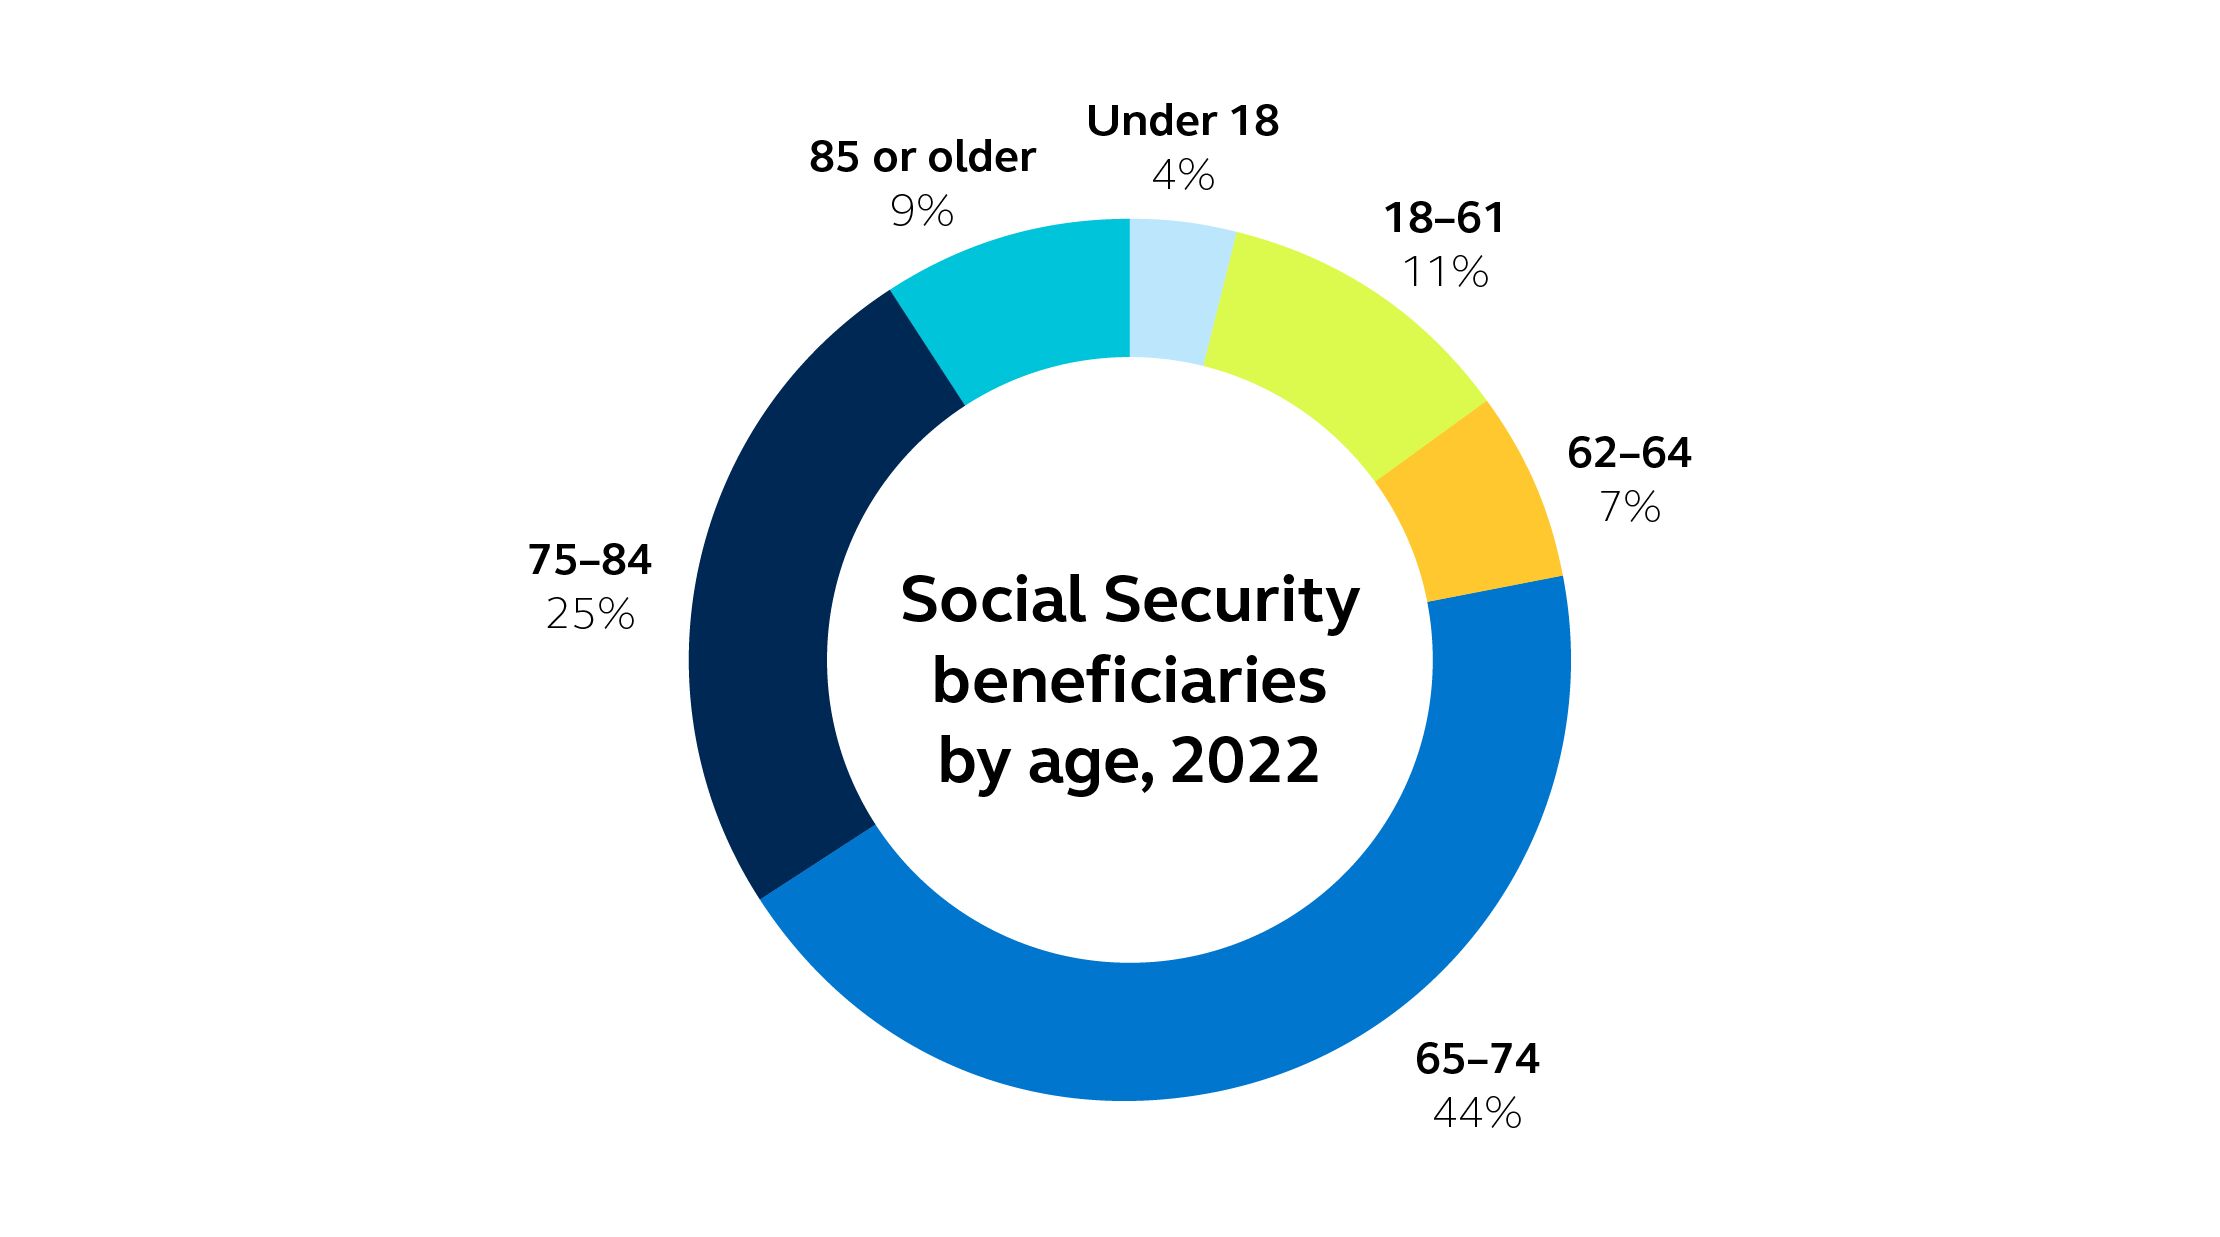 Chart showing social security beneficiaries by age, 2022.